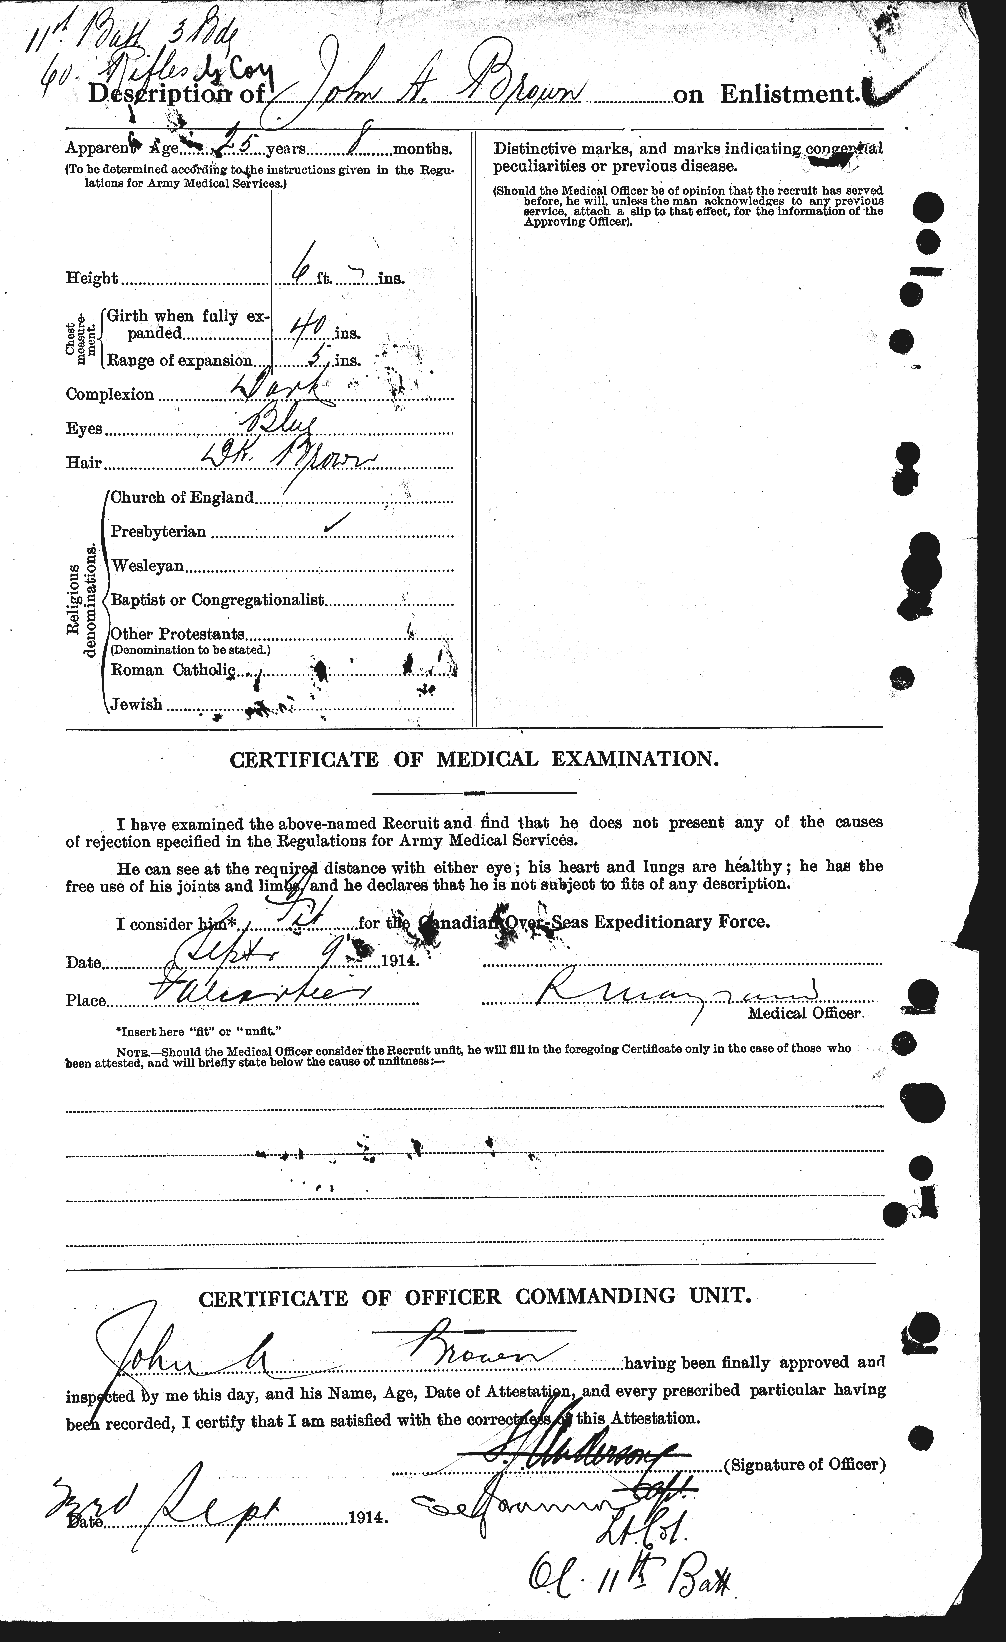 Personnel Records of the First World War - CEF 264556b